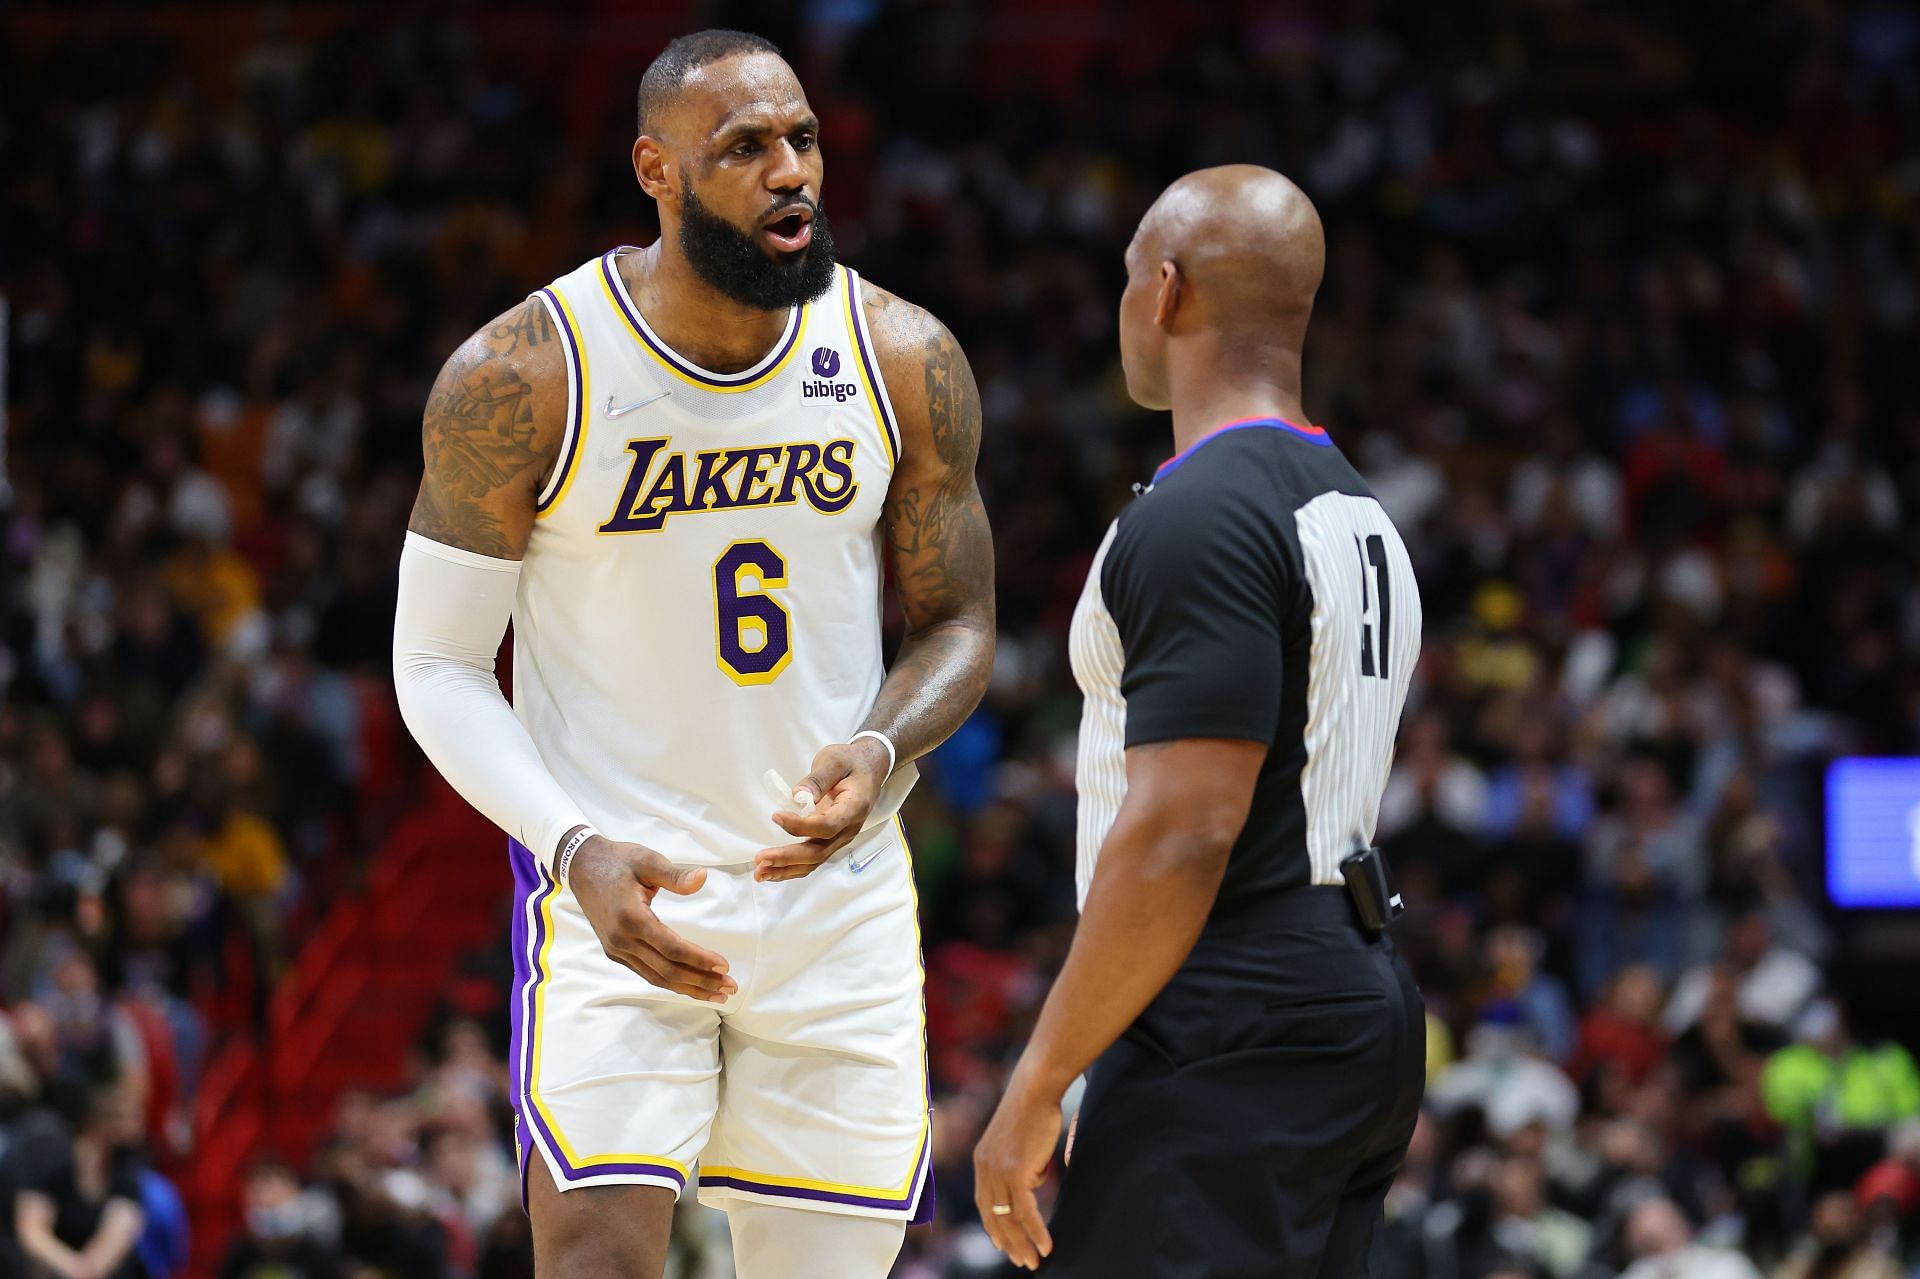 LeBron James of the LA Lakers talking to a referee.